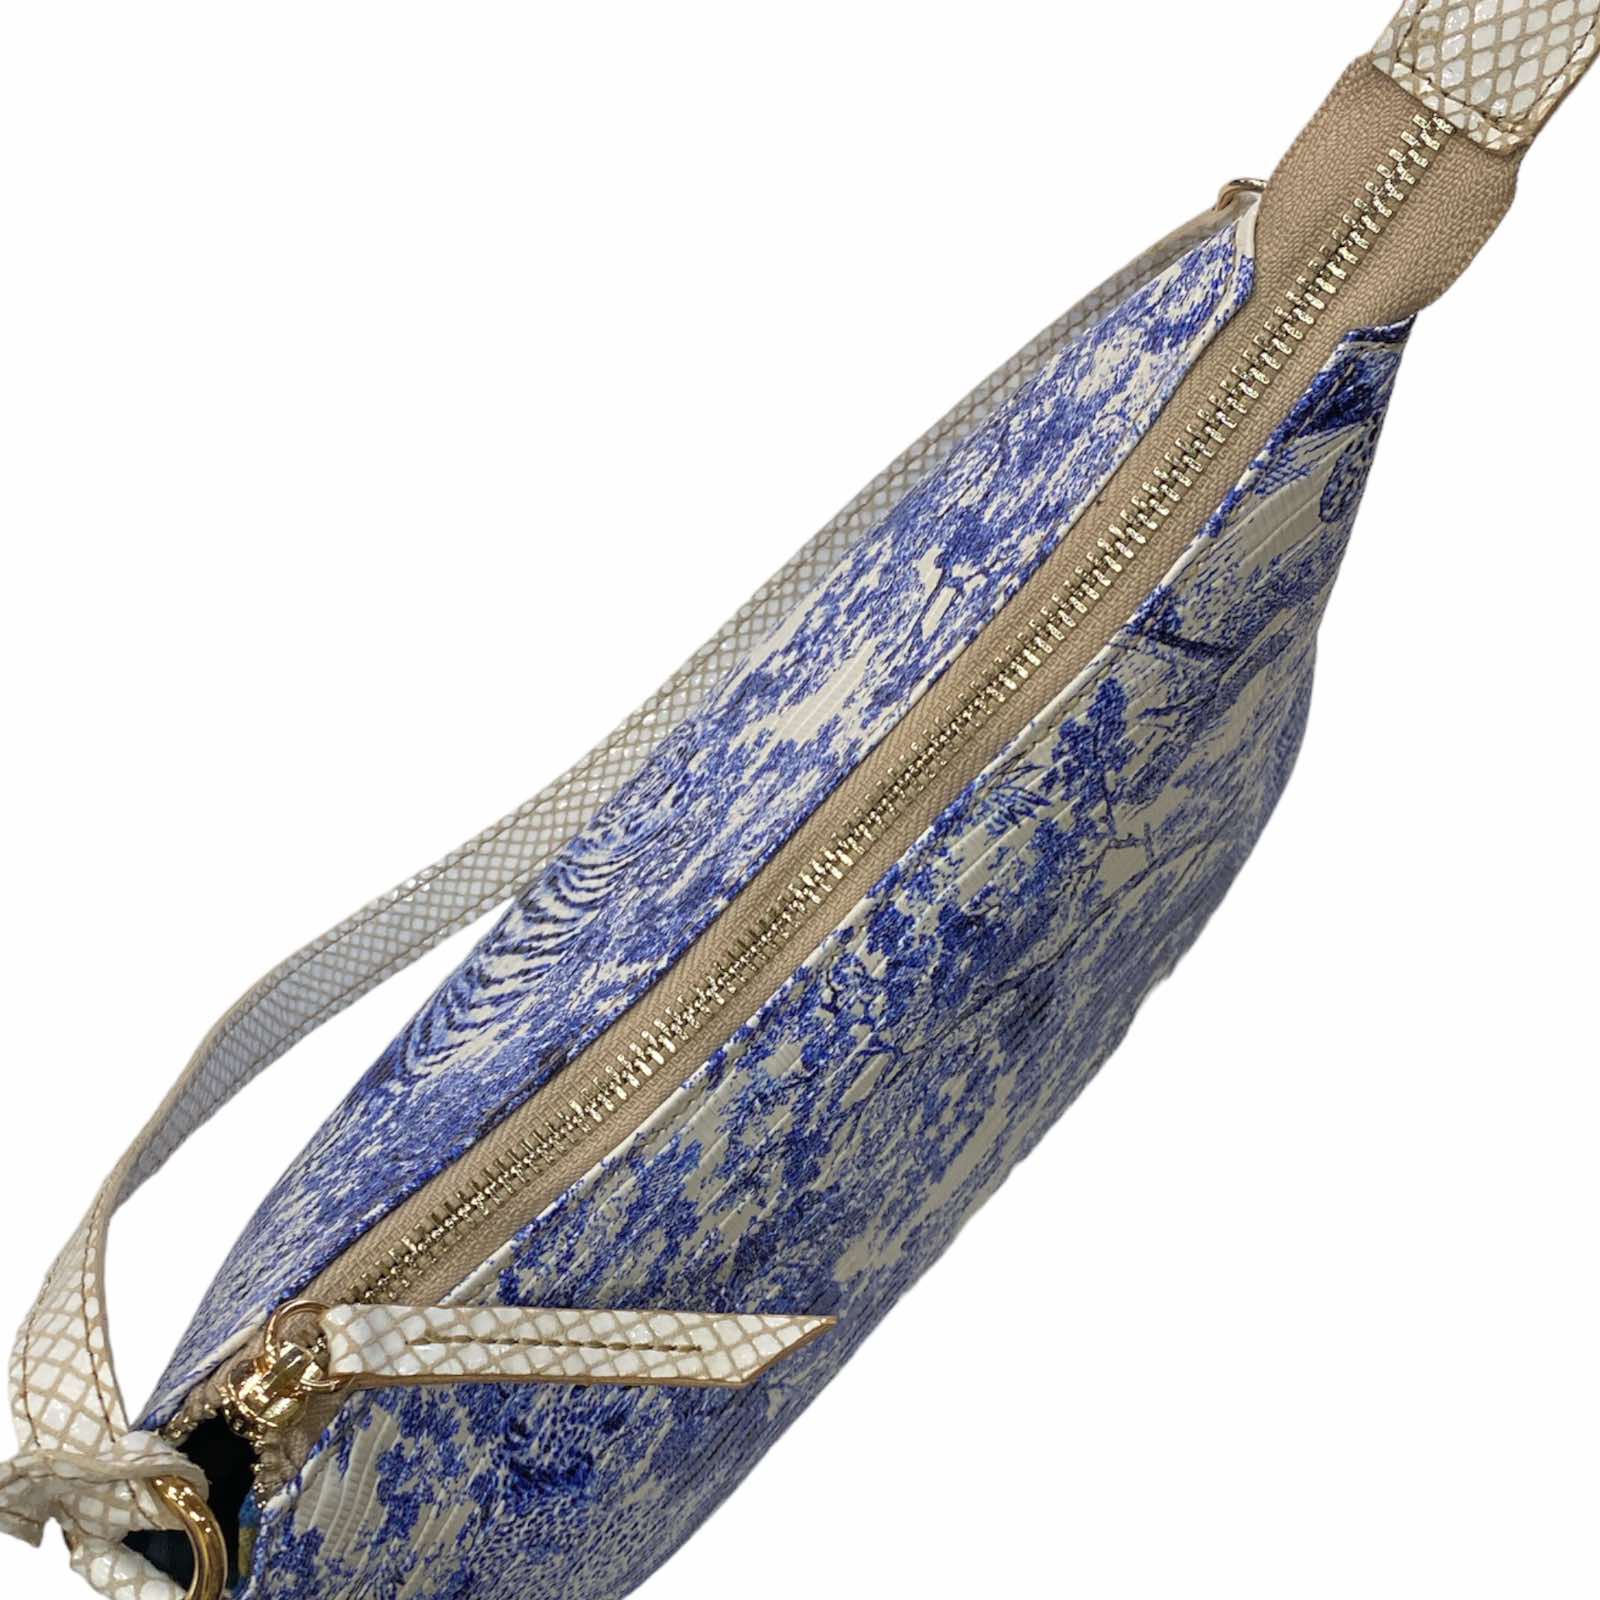 Natalie L. Royal blue and white art leather evening bag